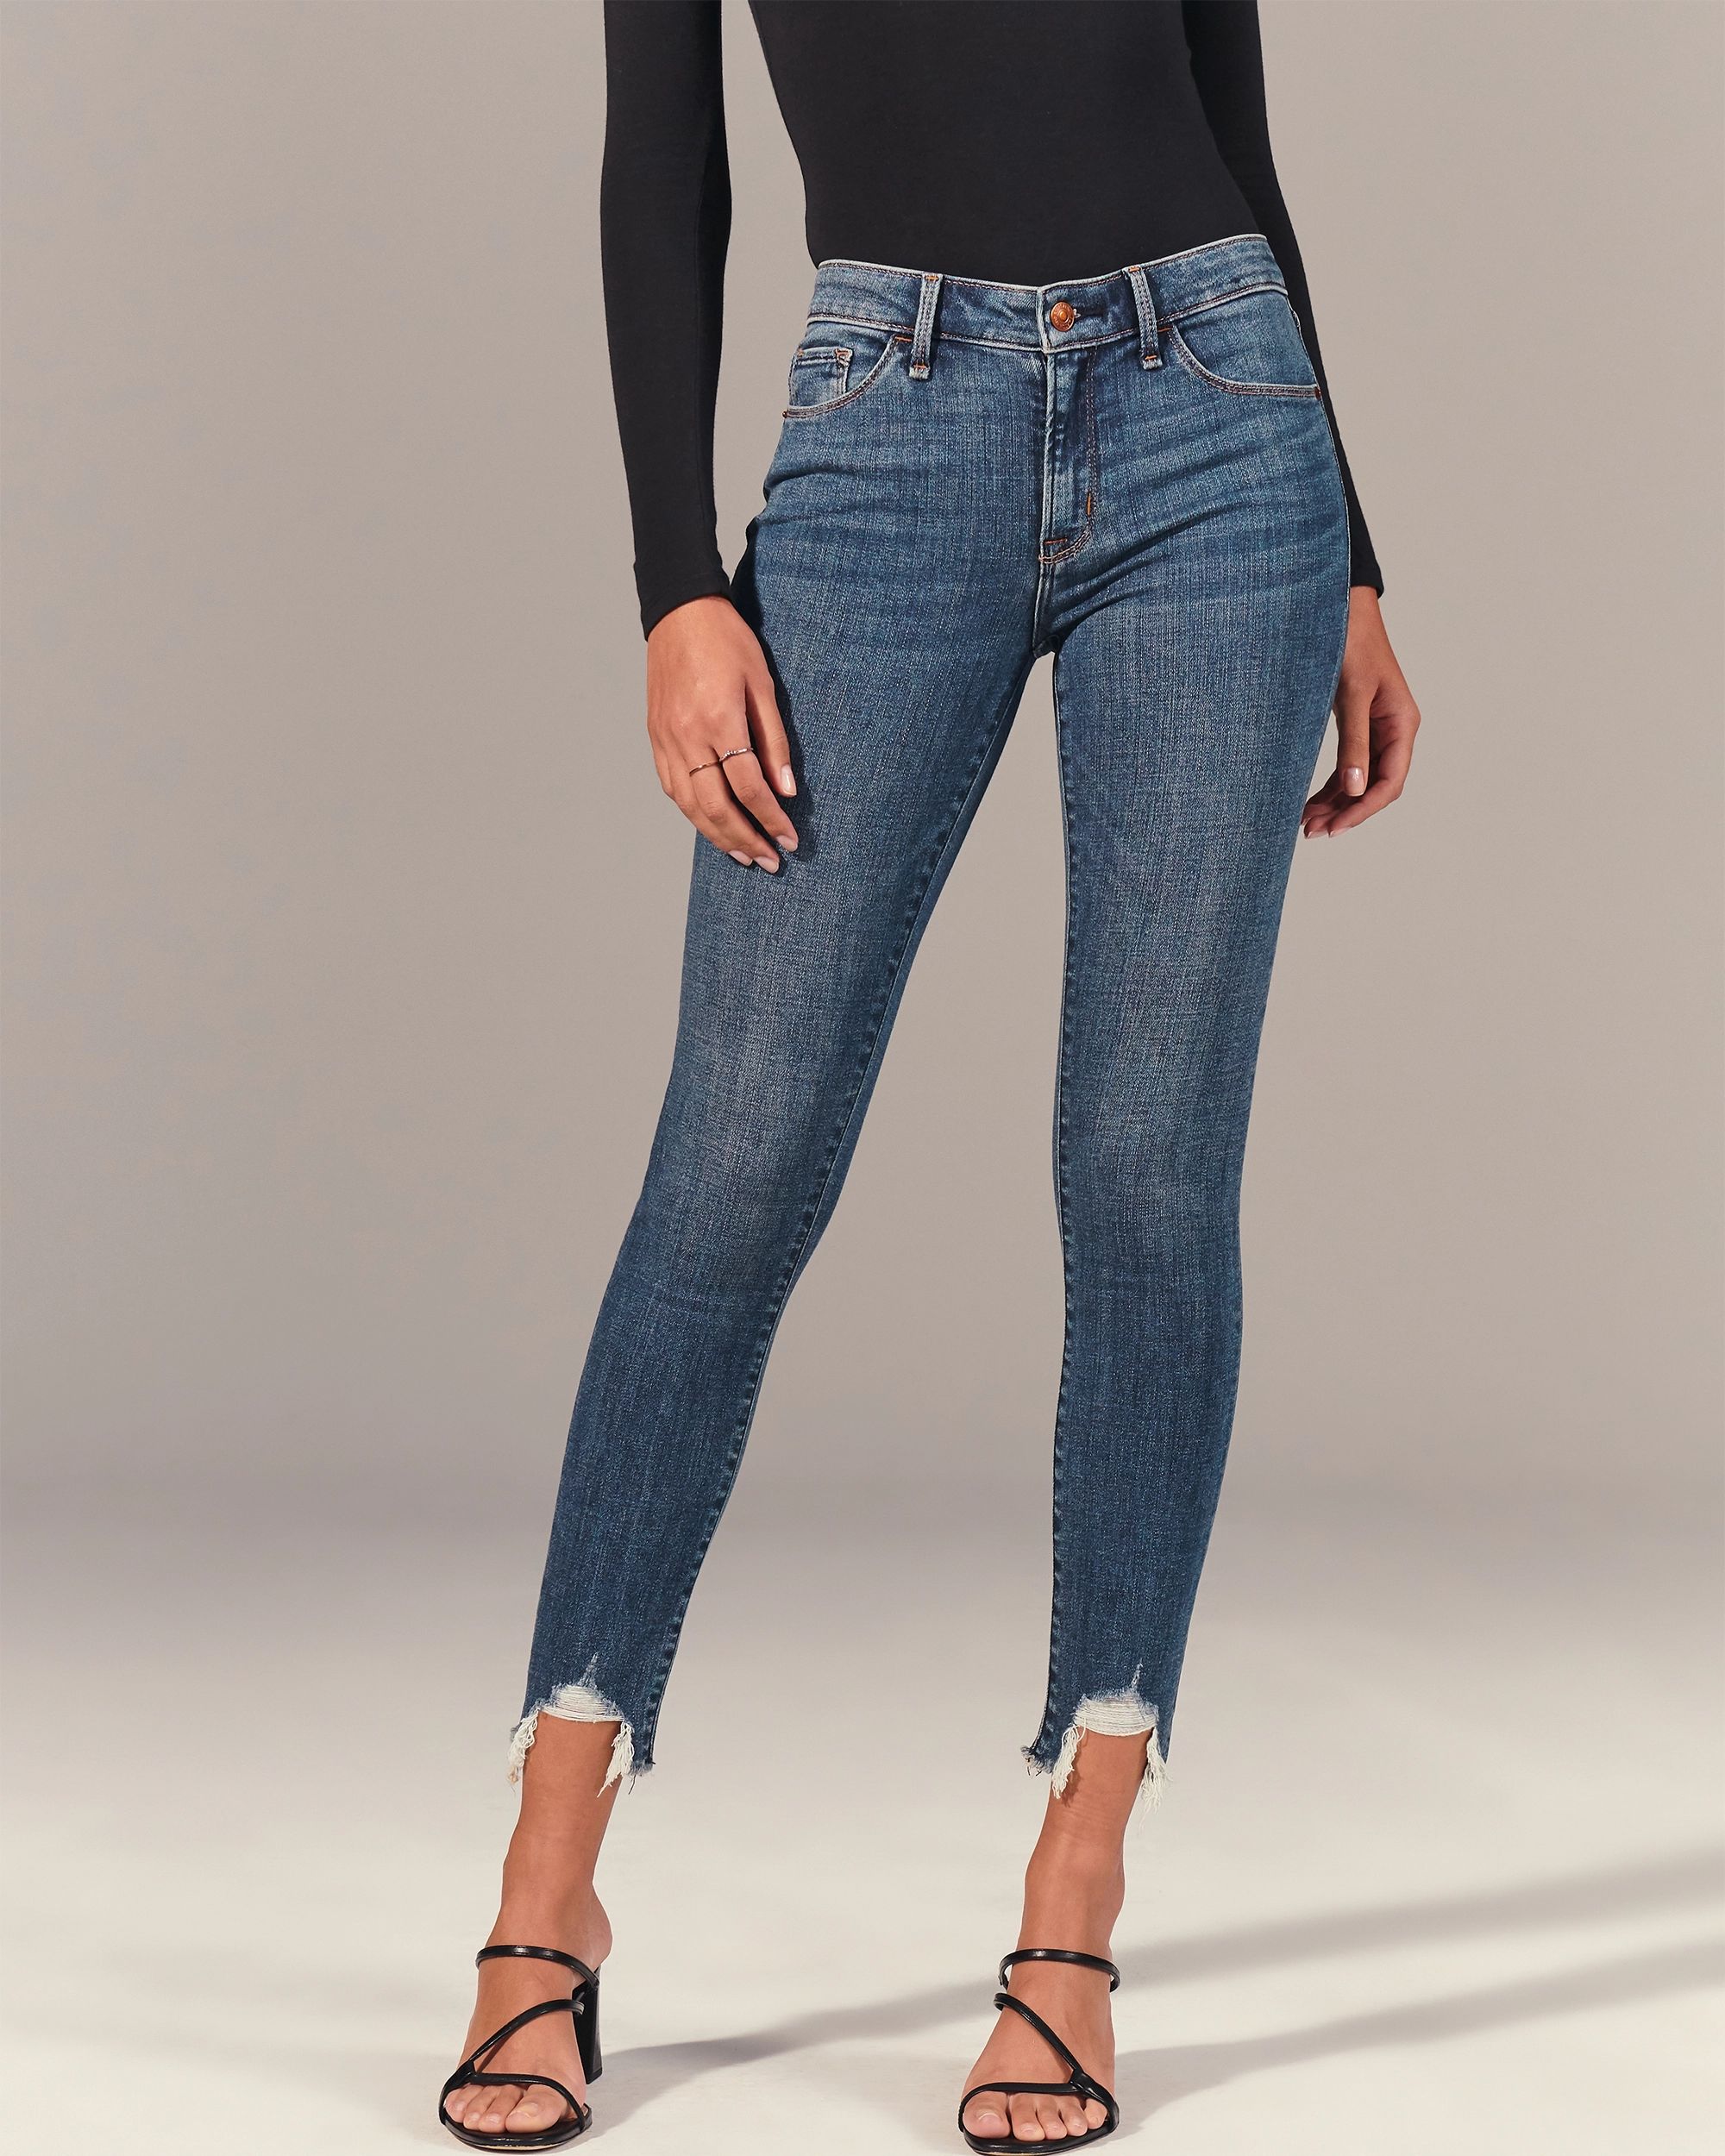 A&F Signature Stretch Denim | Online Exclusive
			


  
						Mid Rise Super Skinny Ankle Jeans
	... | Abercrombie & Fitch (US)